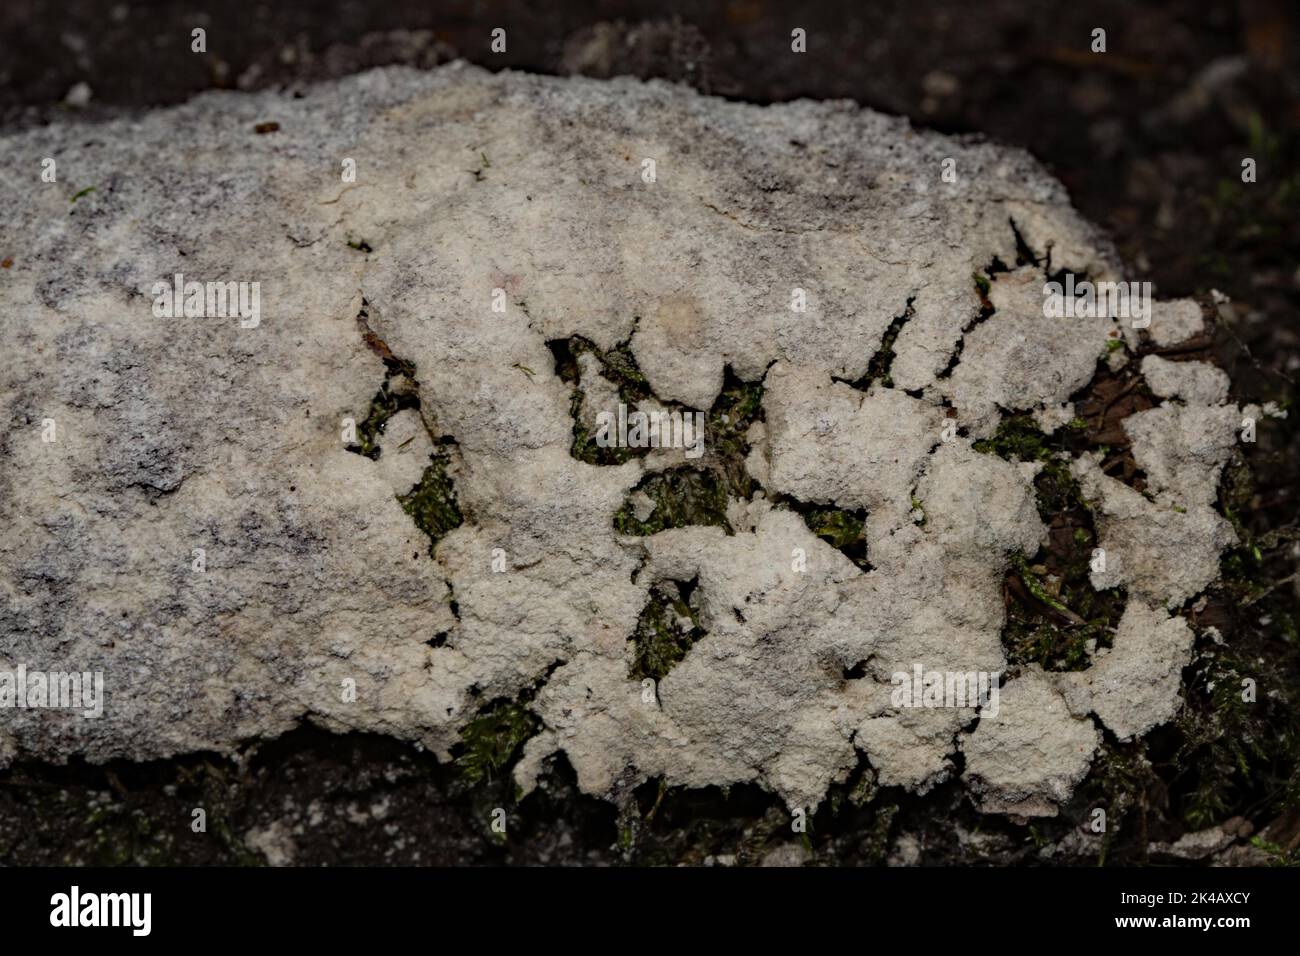 Villous slime mould cushion-shaped elongated grey-brownish fruiting body on tree trunk Stock Photo